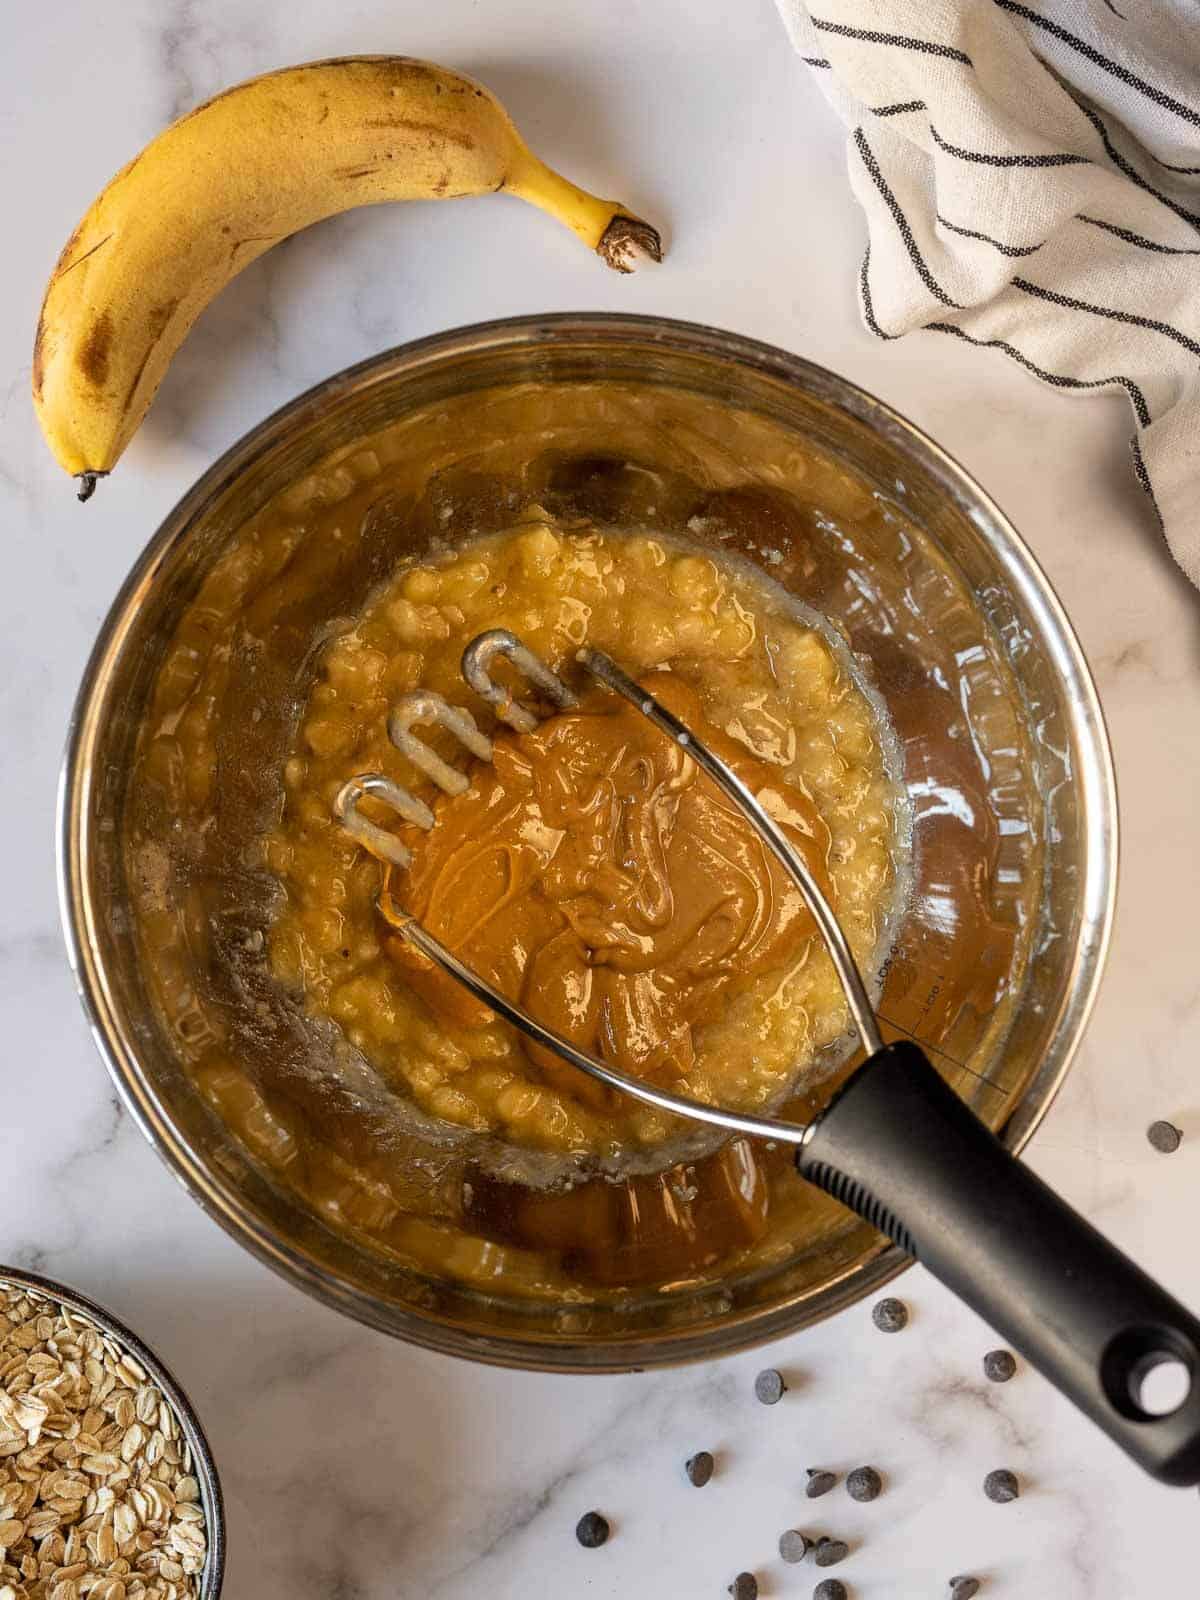 add peanut butter and mix well with the mashed bananas.